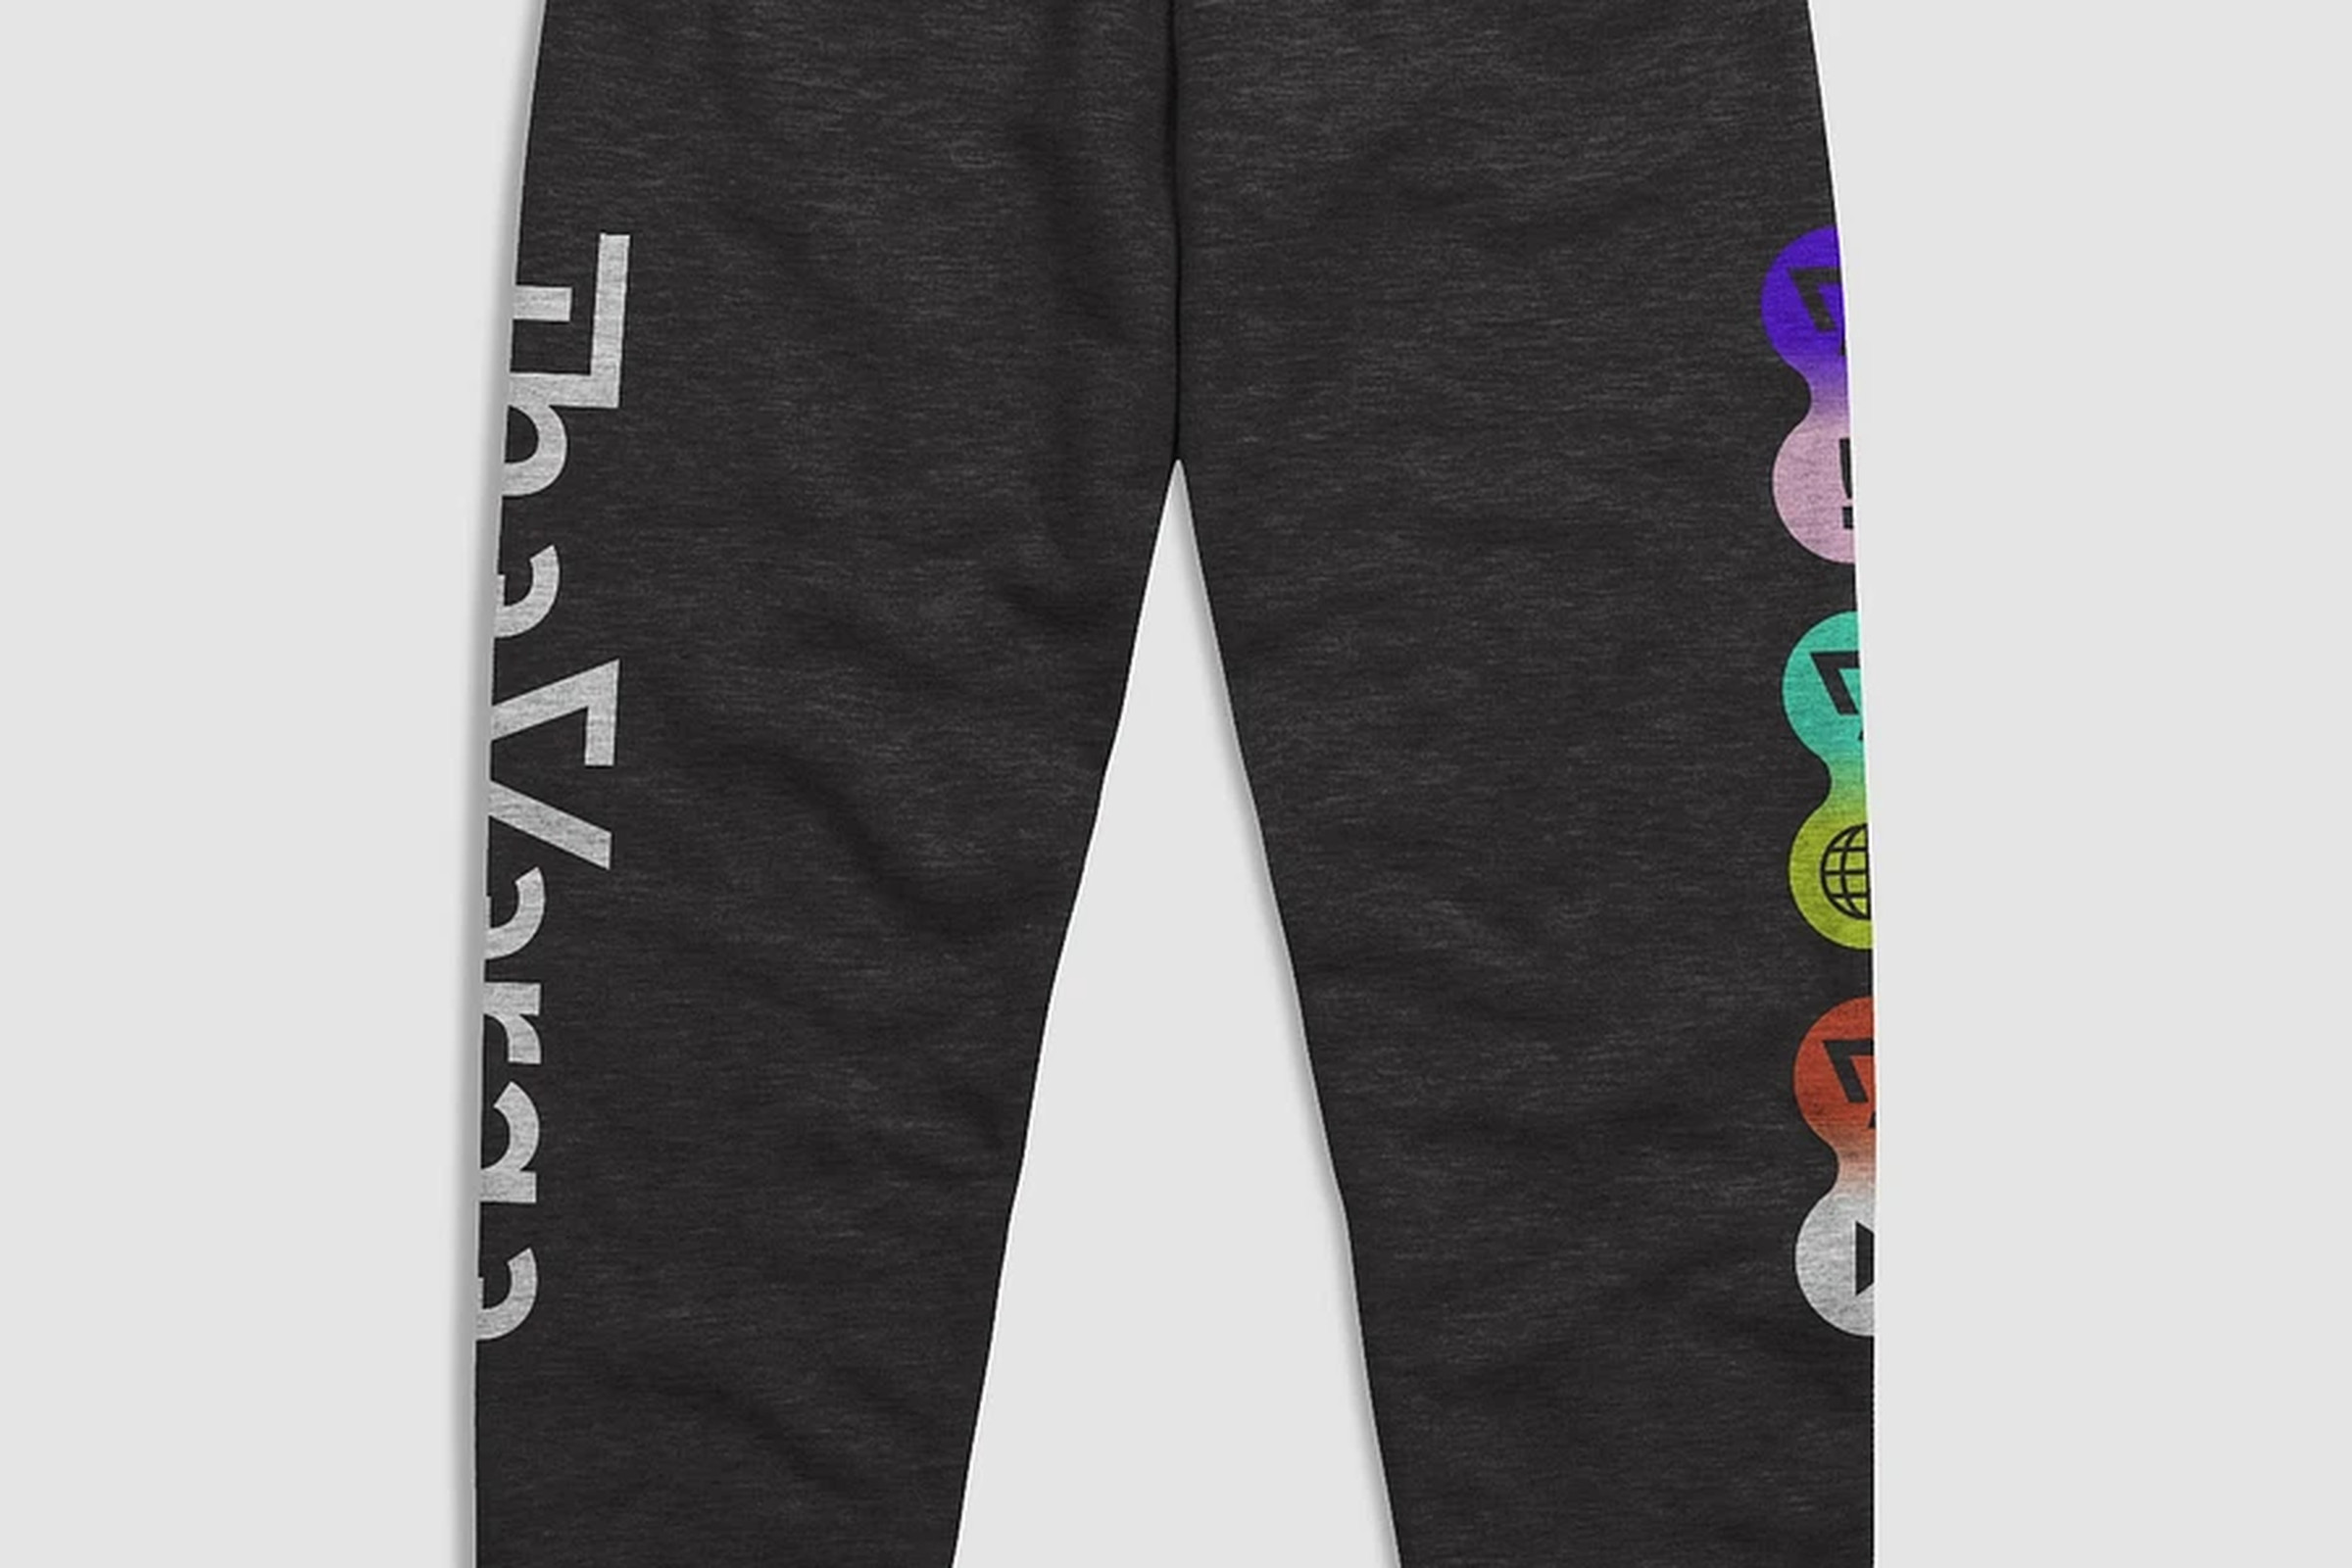 Black jogger pants with The Verge logo and icons